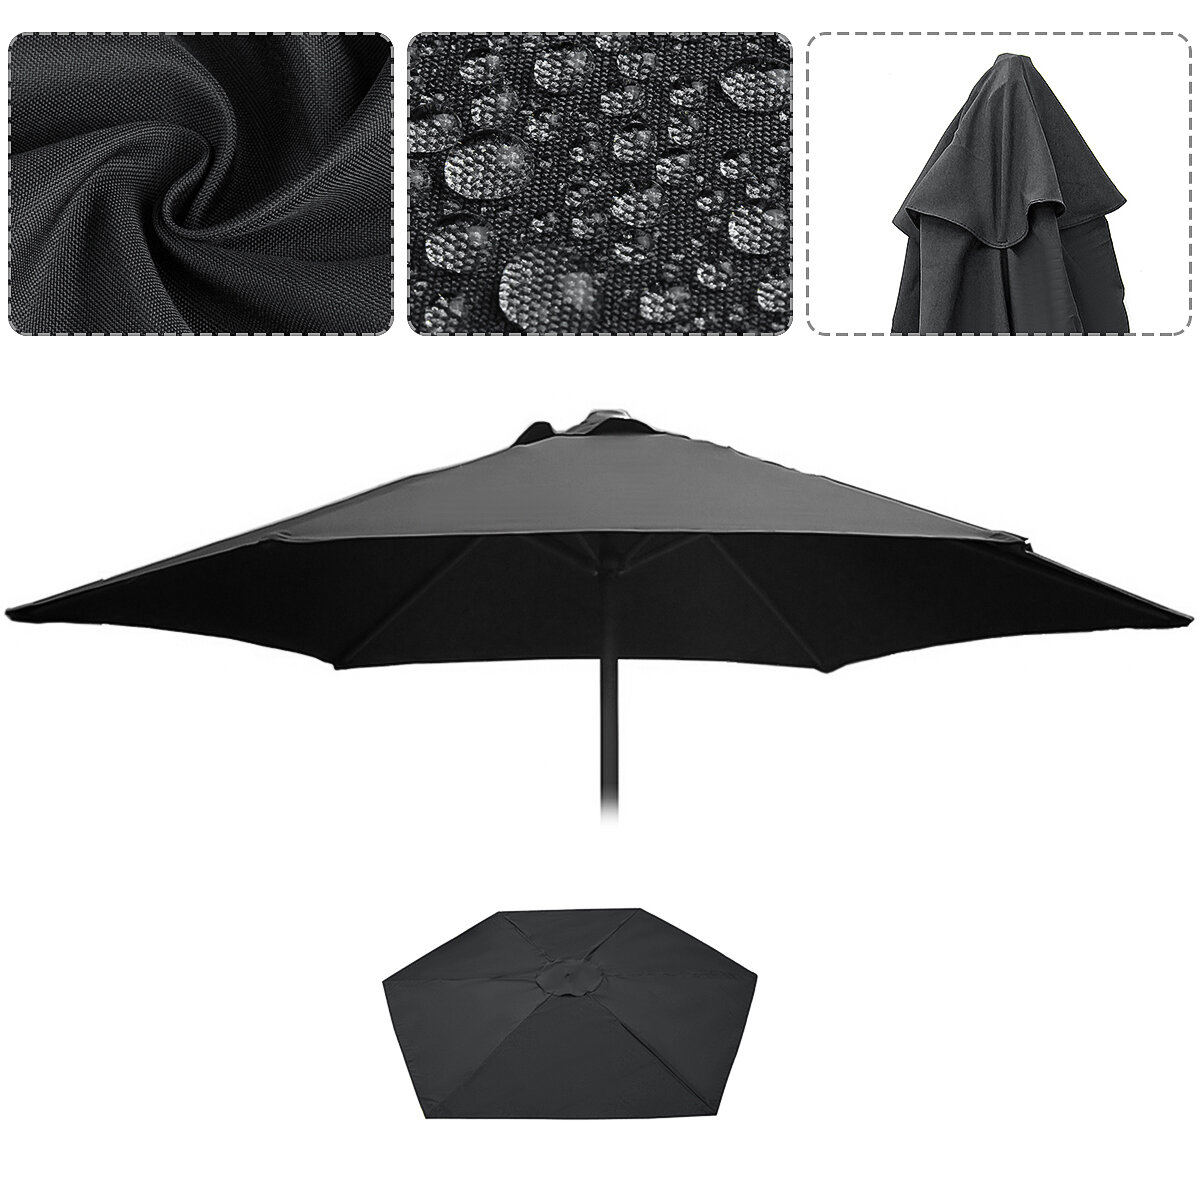 Polyester 2.7M Round Garden Parasol Outdoor Umbrella Sun Shade Canopy Cover Waterproof UV Protect Pa